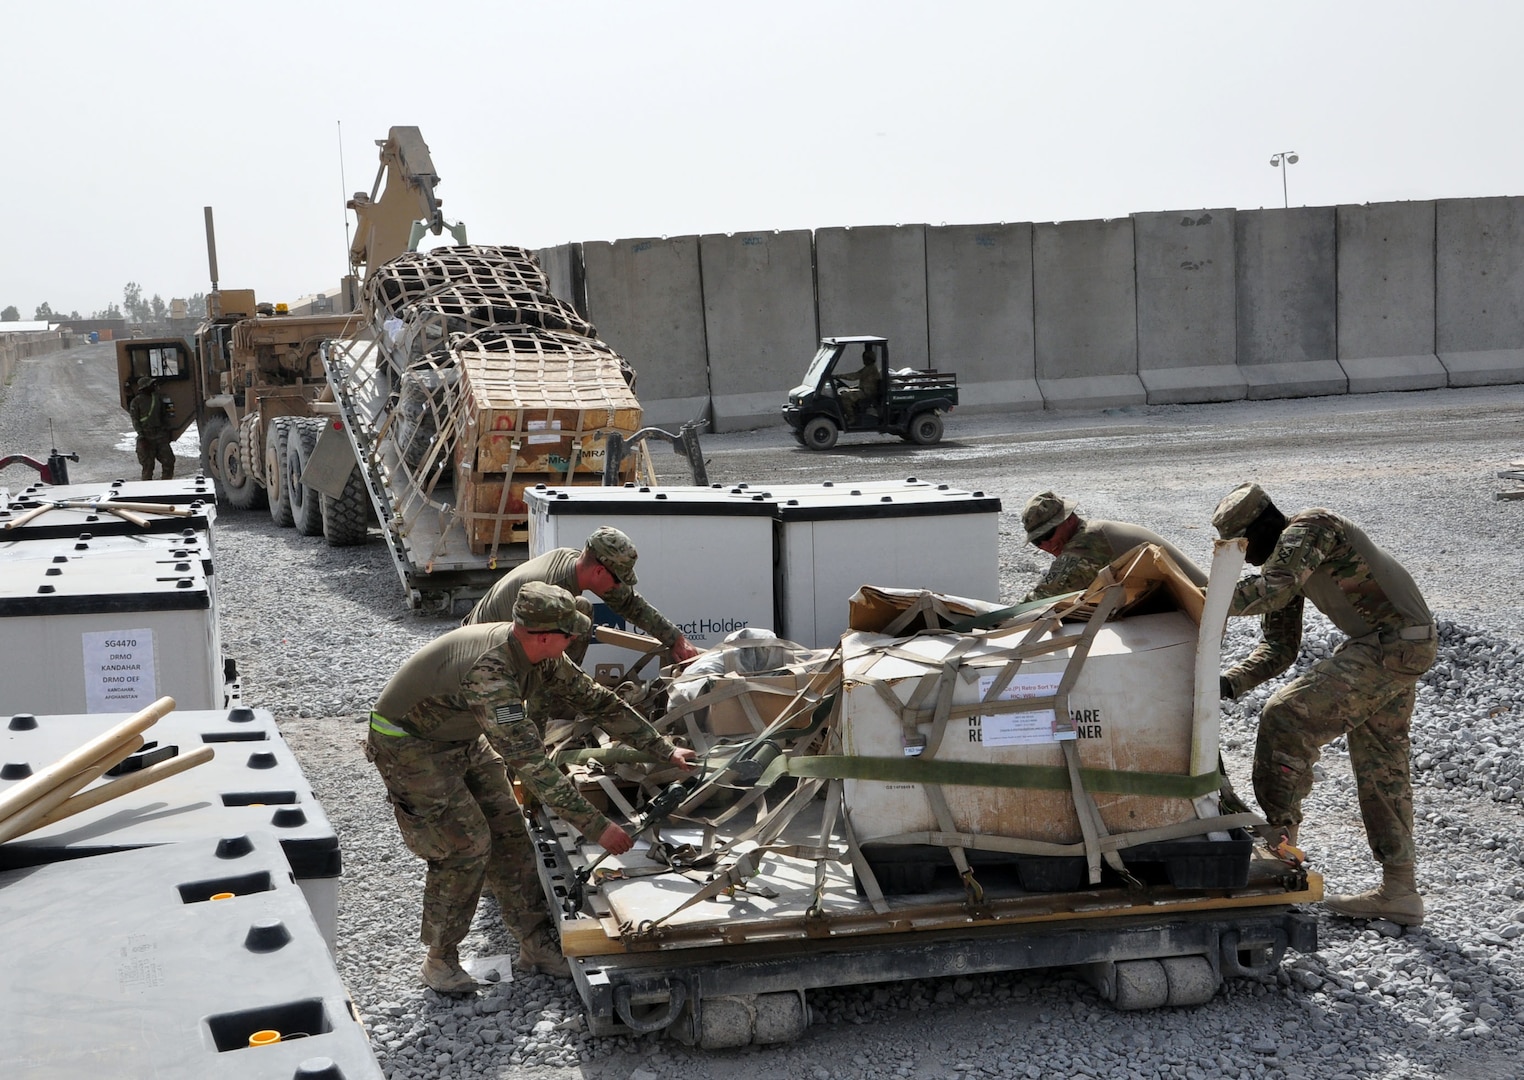 Alabama Army National Guard Soldiers with the 781st Transportation Company strap down cargo, July 24, 2012, at Forward Operating Base Walton, Afghanistan. The 781st TC transports cargo between Kandahar Airfield and other FOB's, helping to sustain troops out in the field.